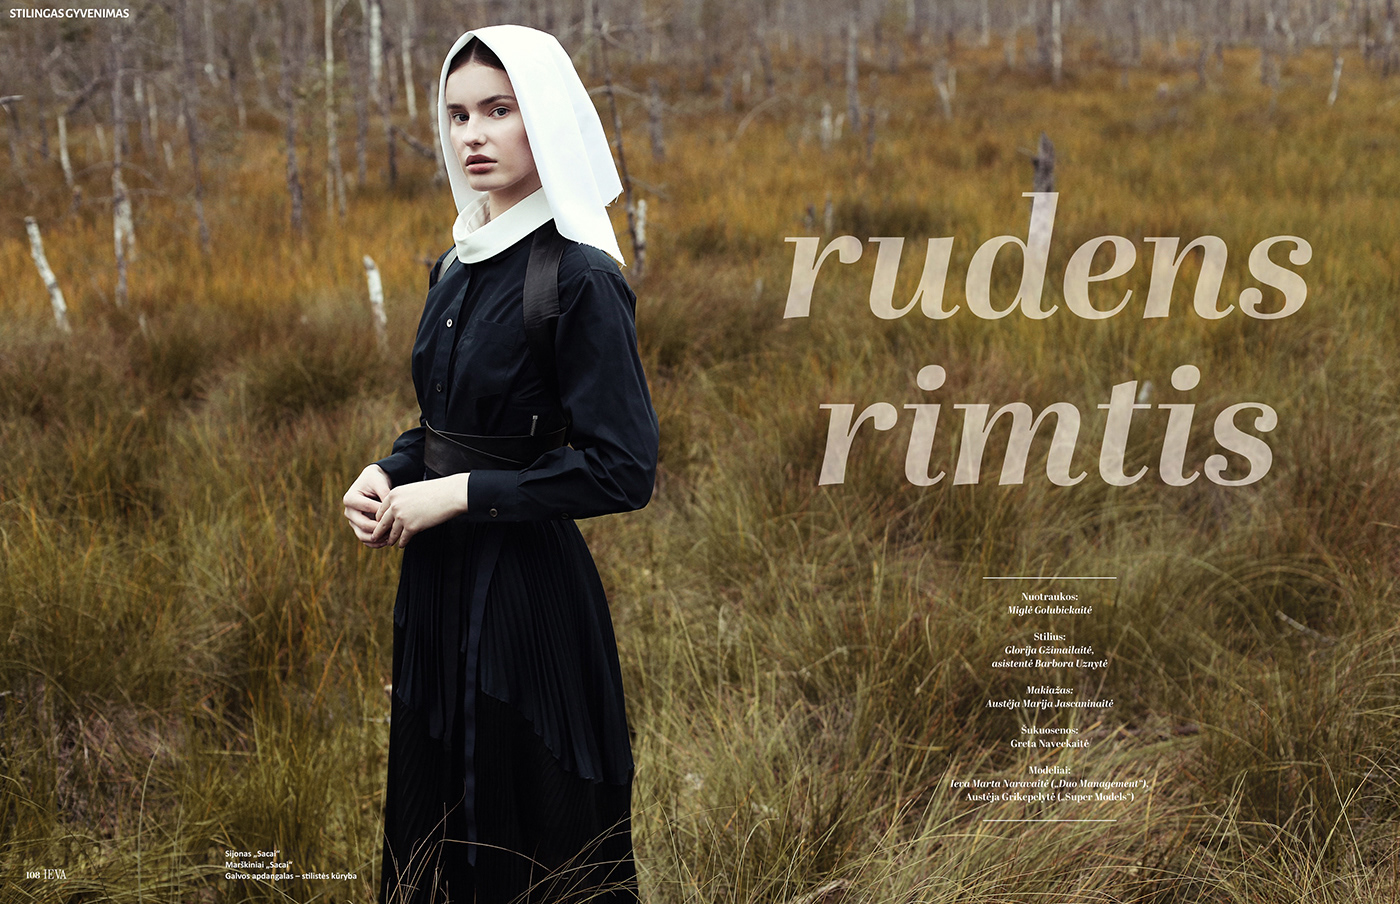 autumn forest swamp women models royalty Style concept editorial magazine